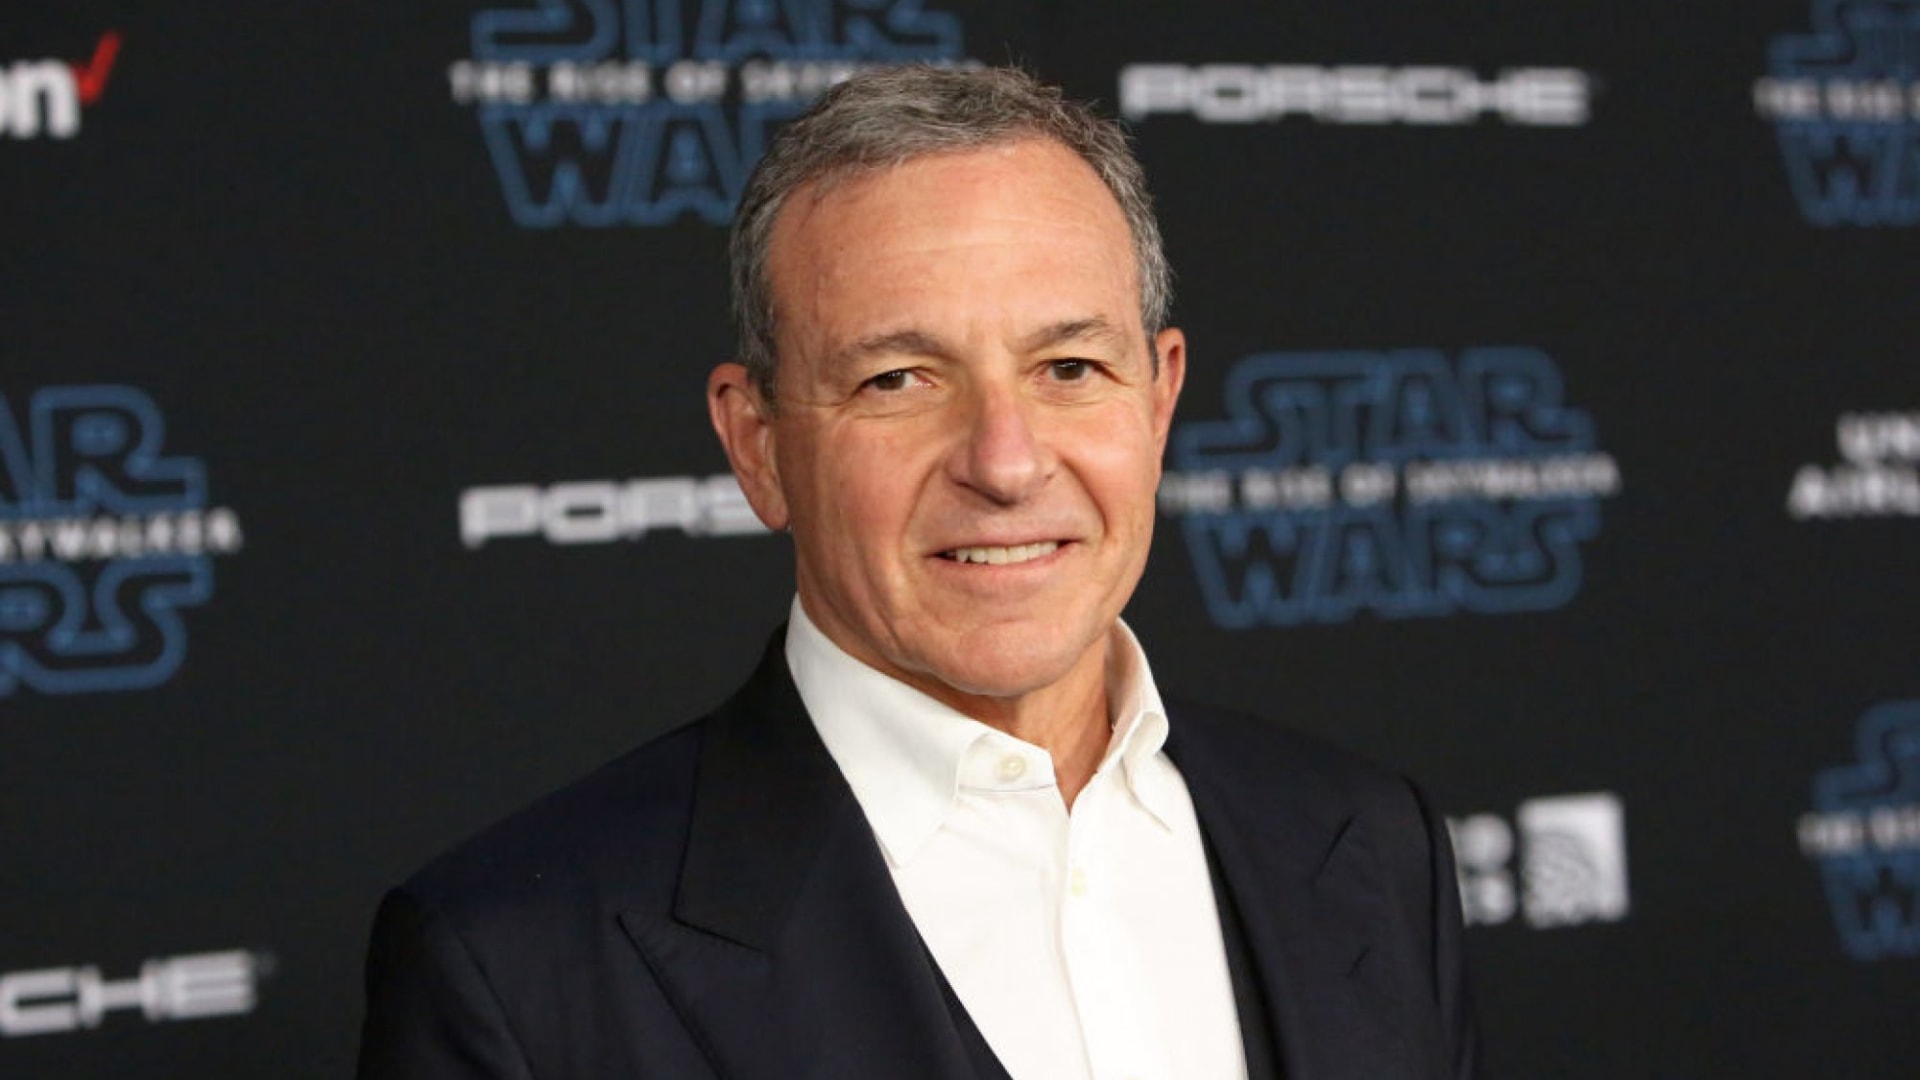 Disney's Former CEO Bob Iger Said His Legendary Success Came Down to this 1 Simple Principle Anyone Can Copy